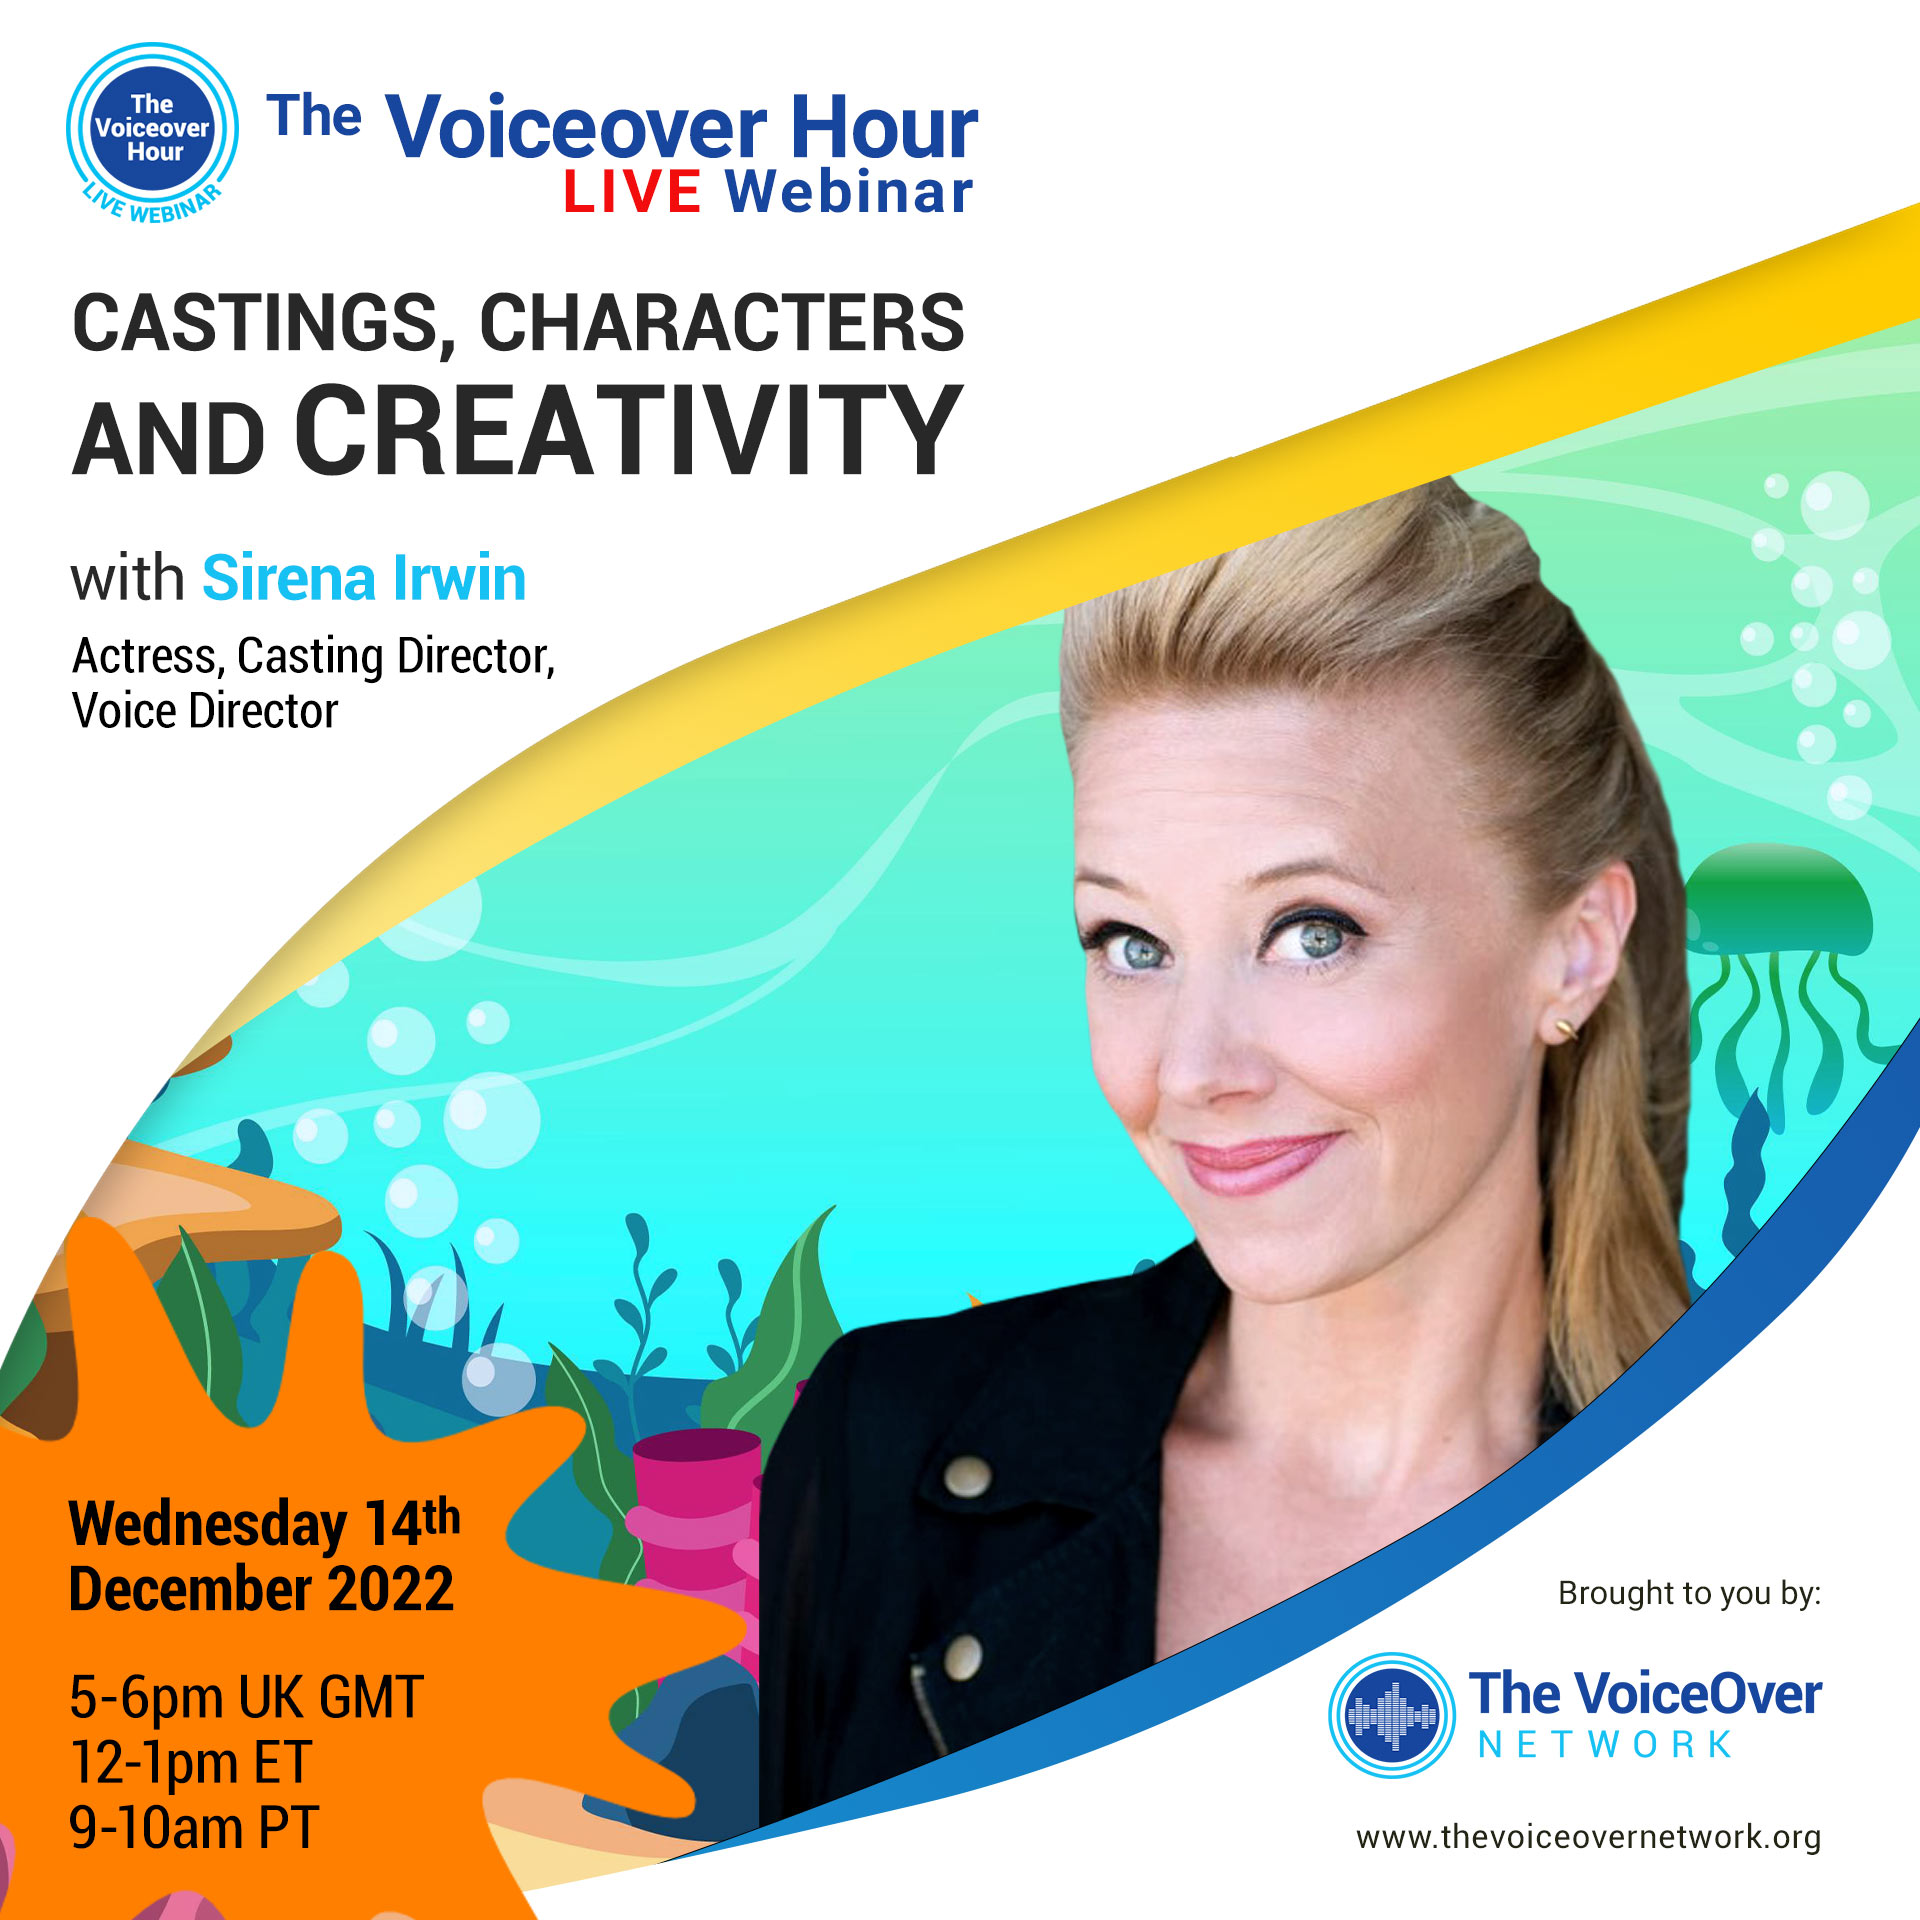 The Voiceover Hour, Castings, Characters and Creativity with Sirena Irwin